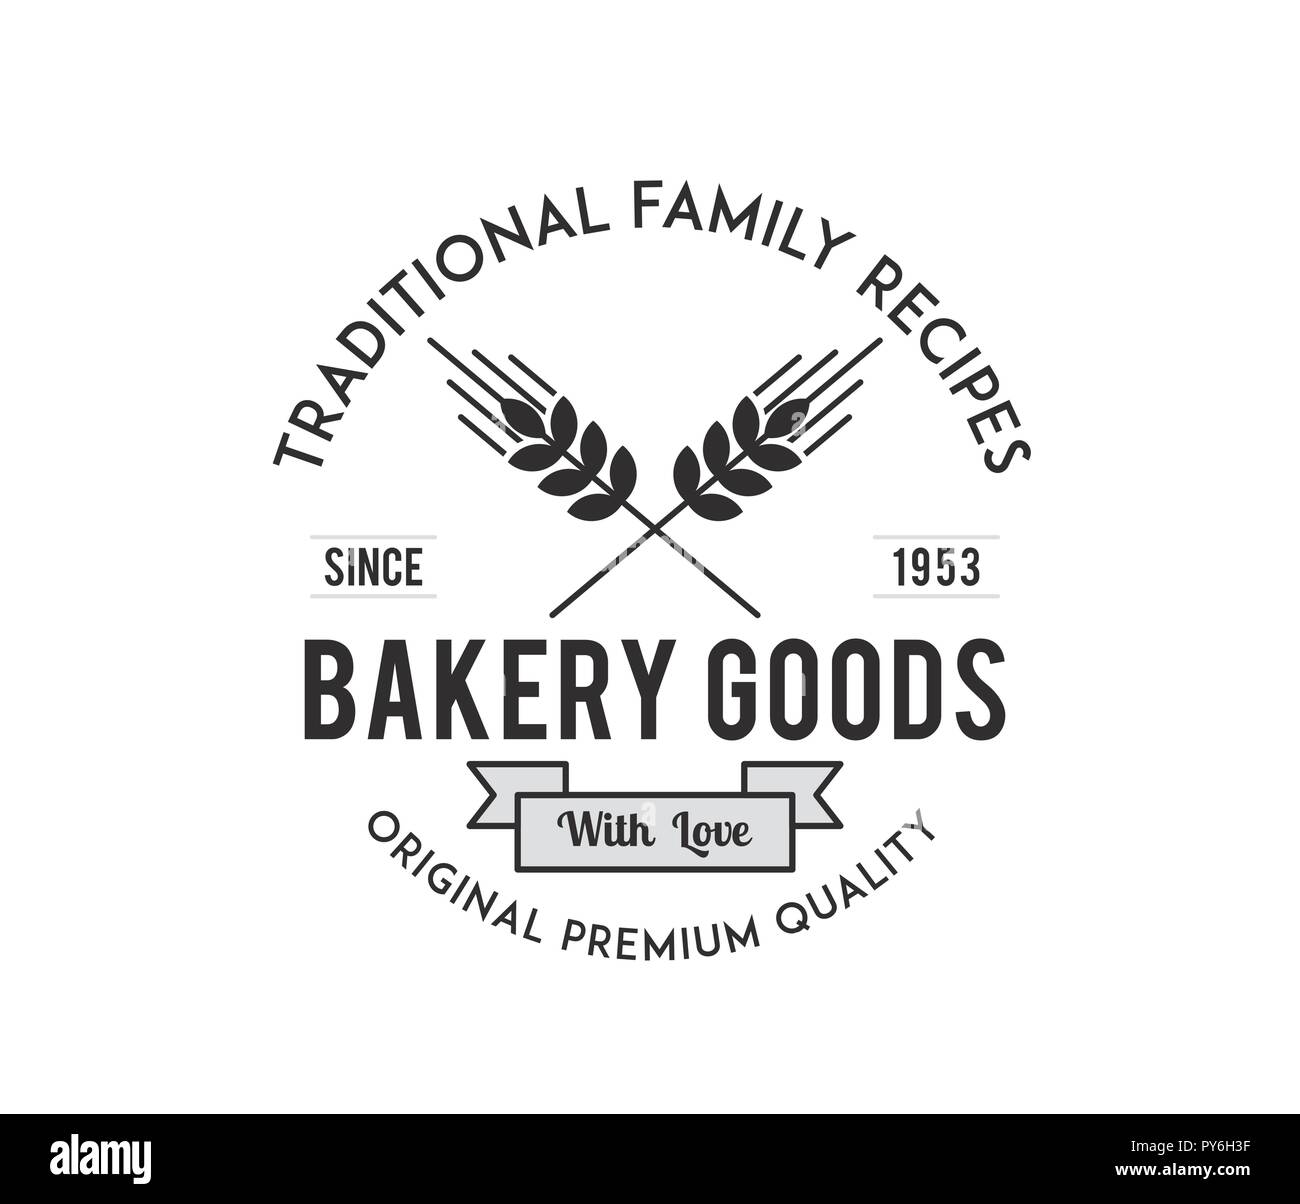 Bakery goods family recipes black on white is a vector illustration about food Stock Vector